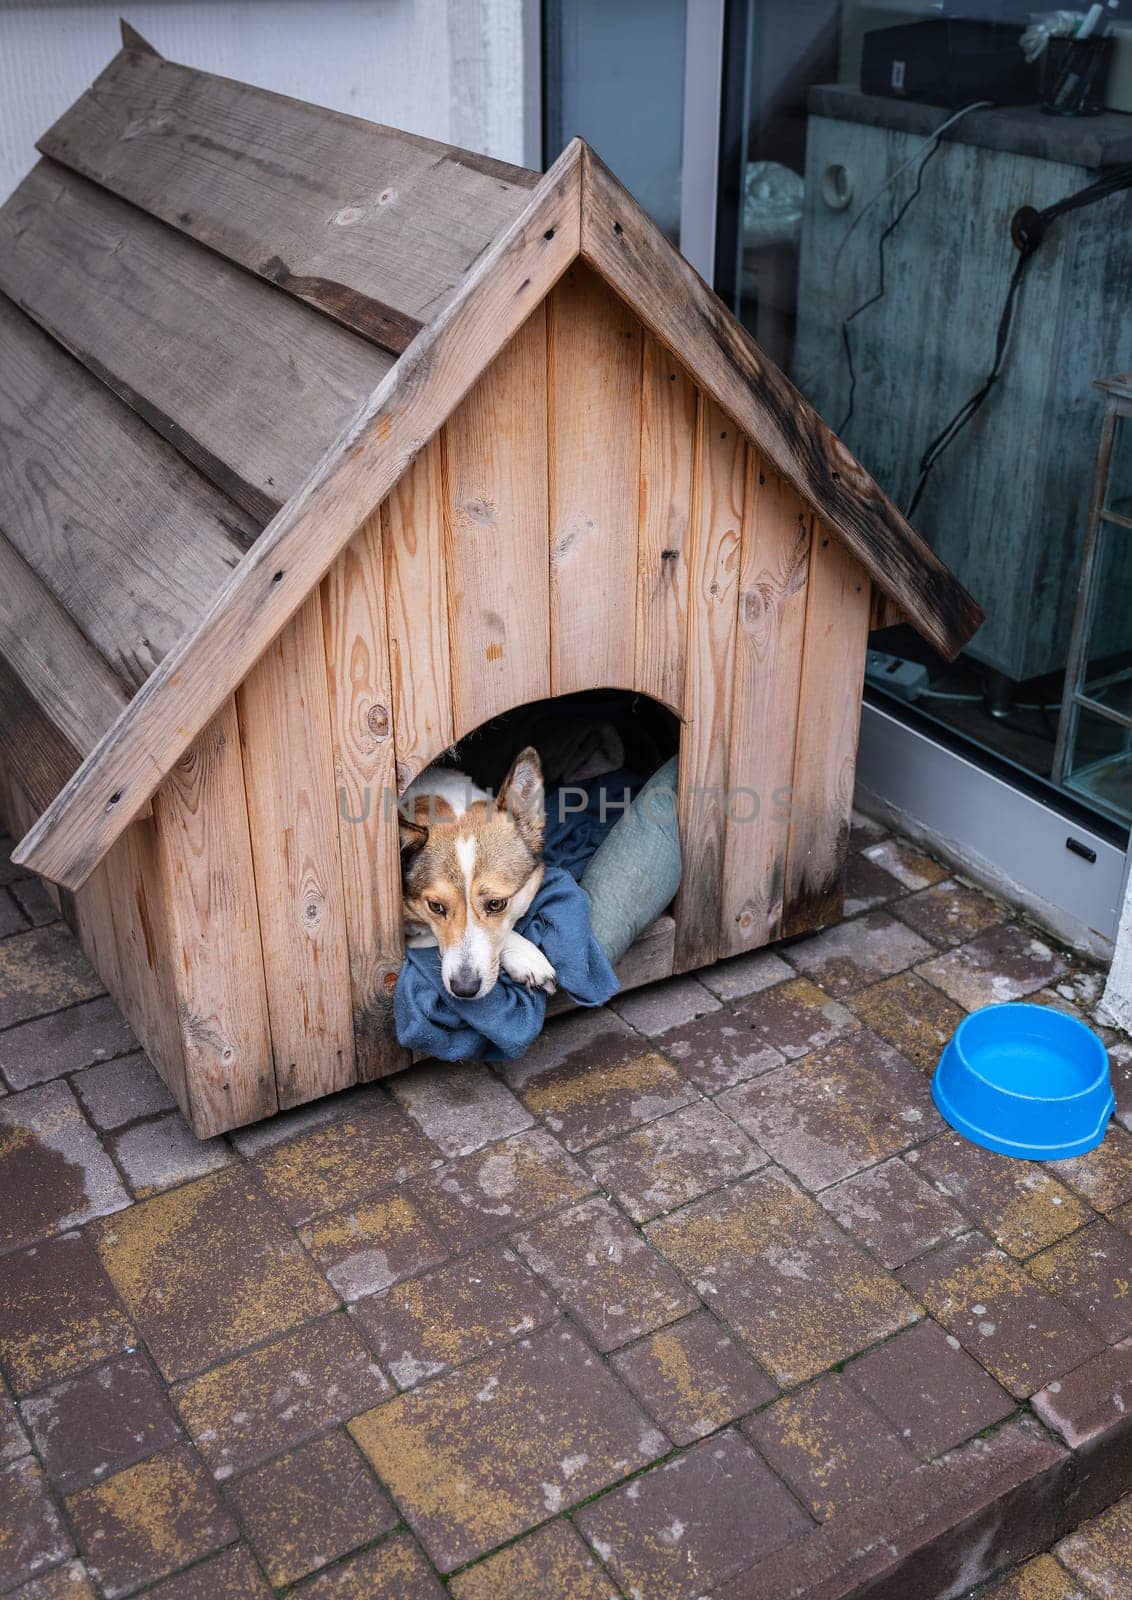 A stray dog rests in a wooden kennel with a blue blanket, next to a storefront in the background